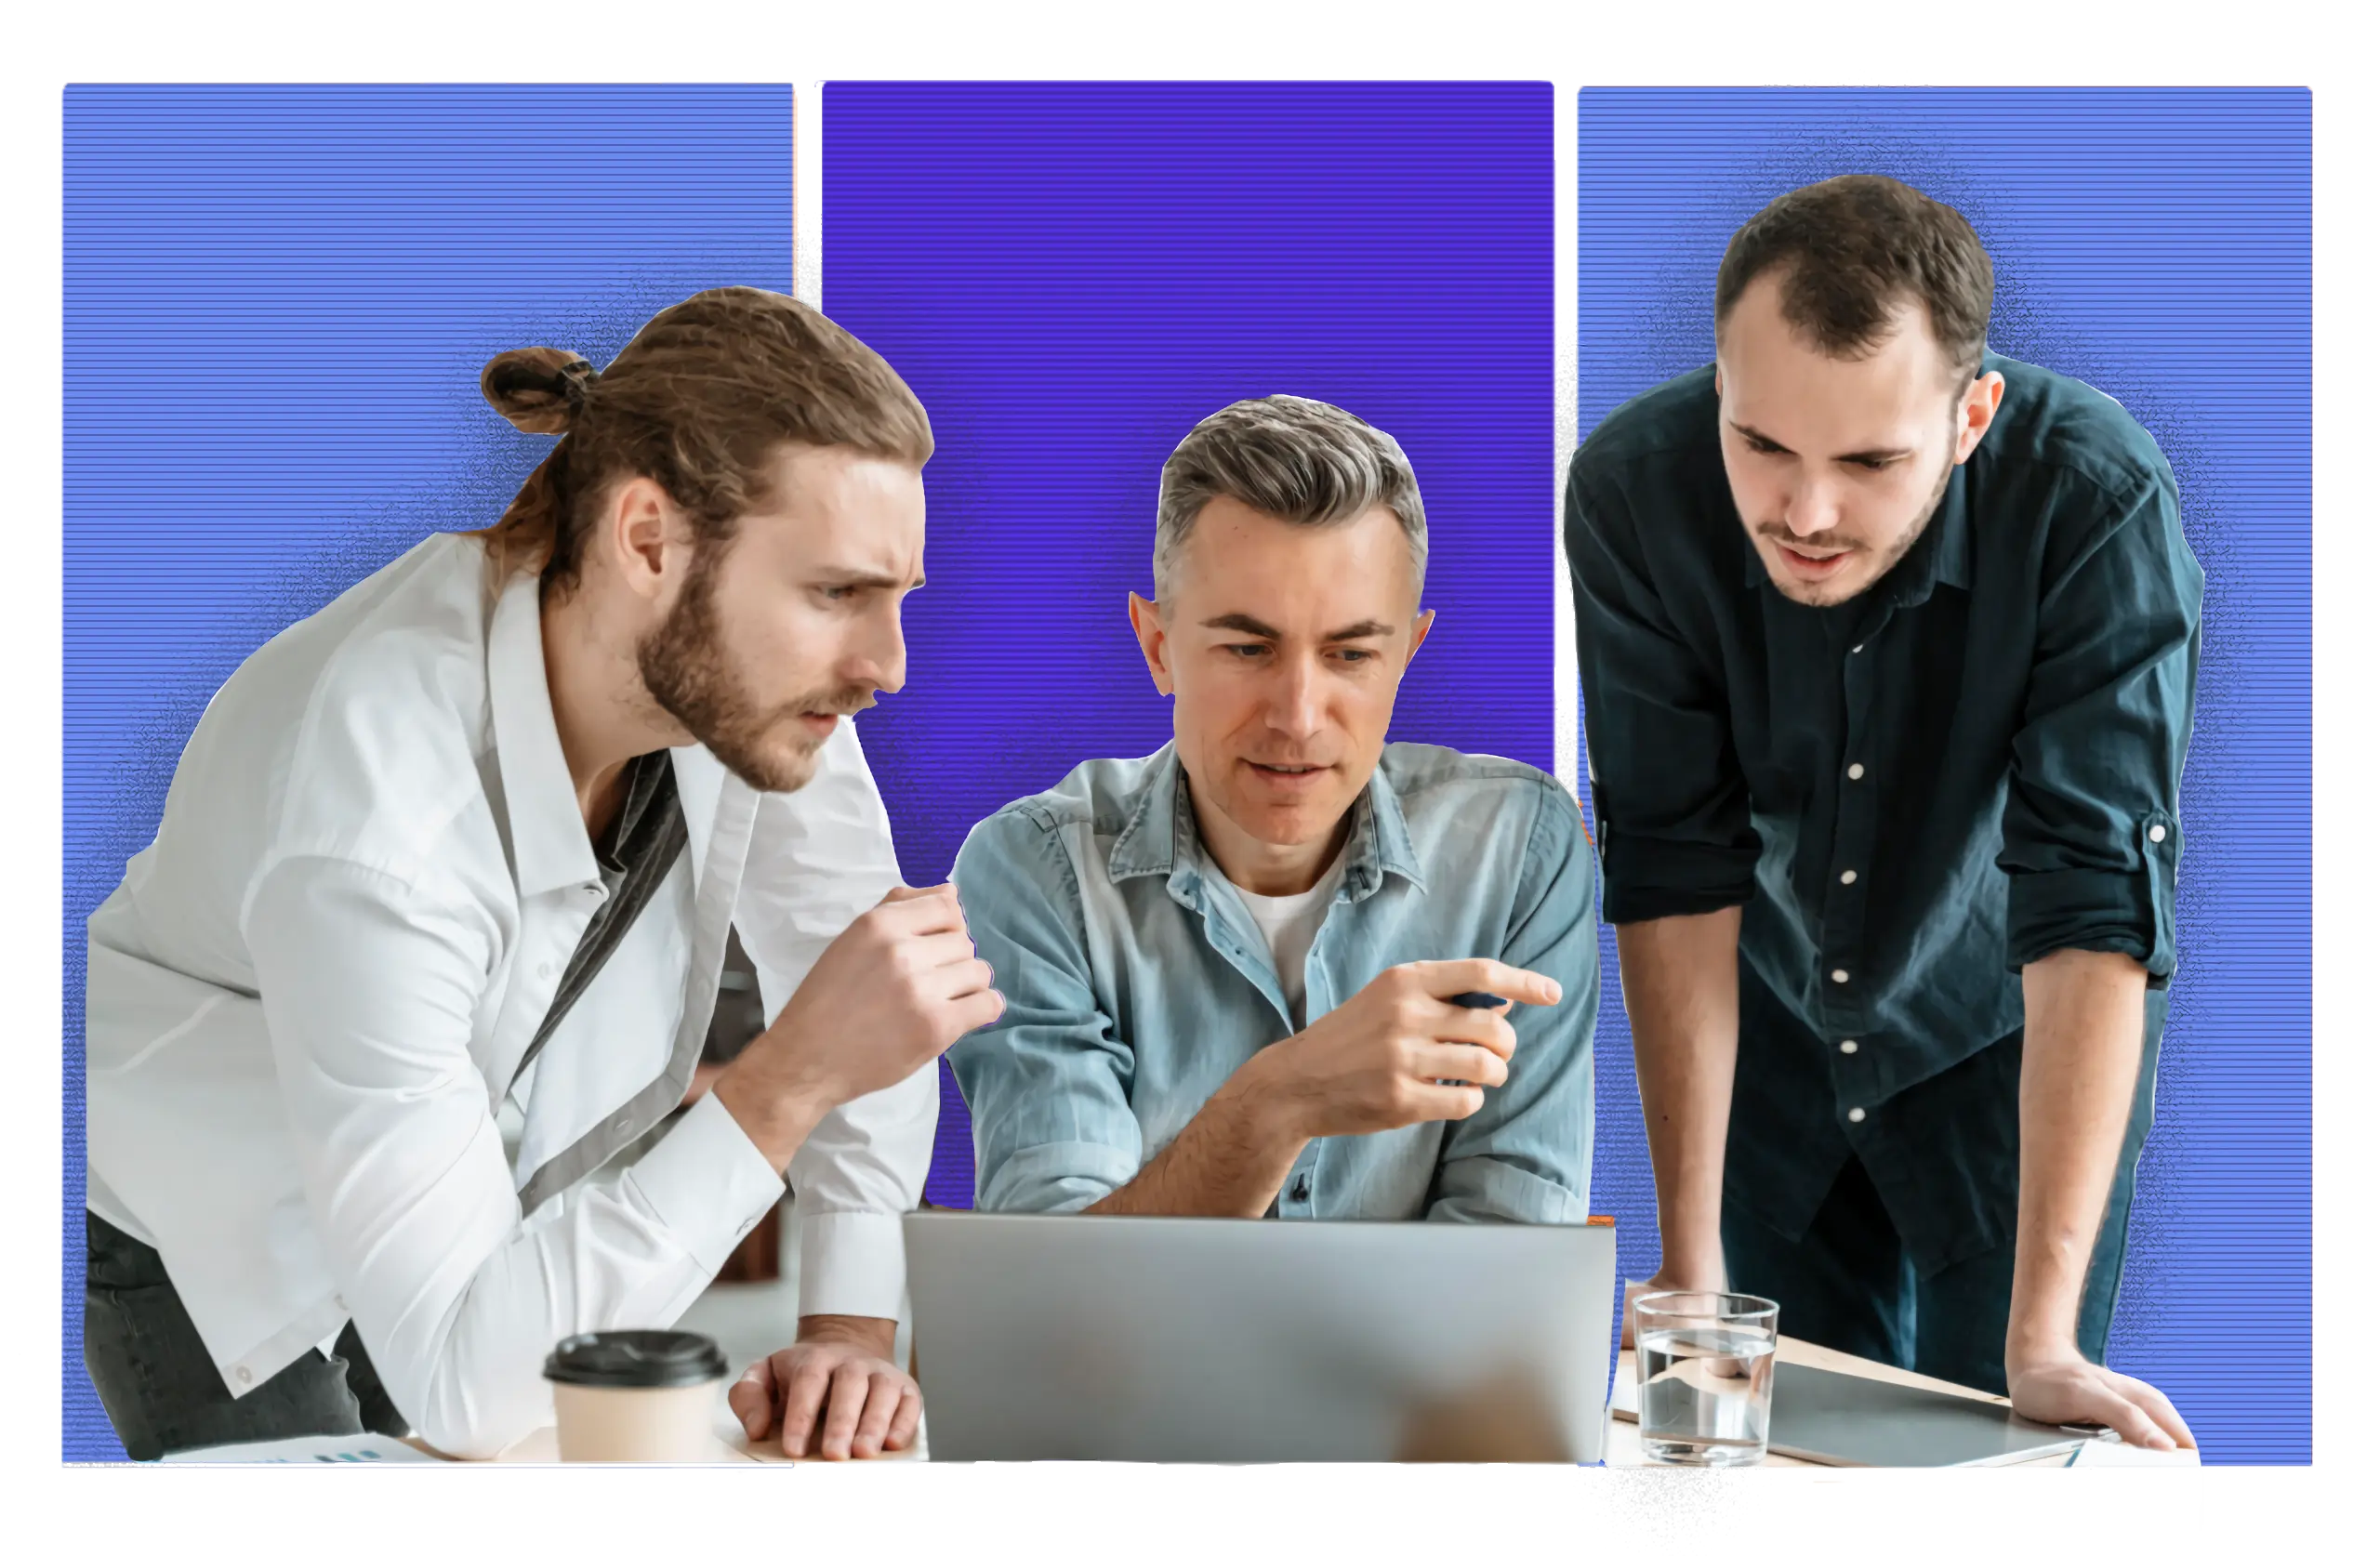 3 men discussing and collaborating on a project